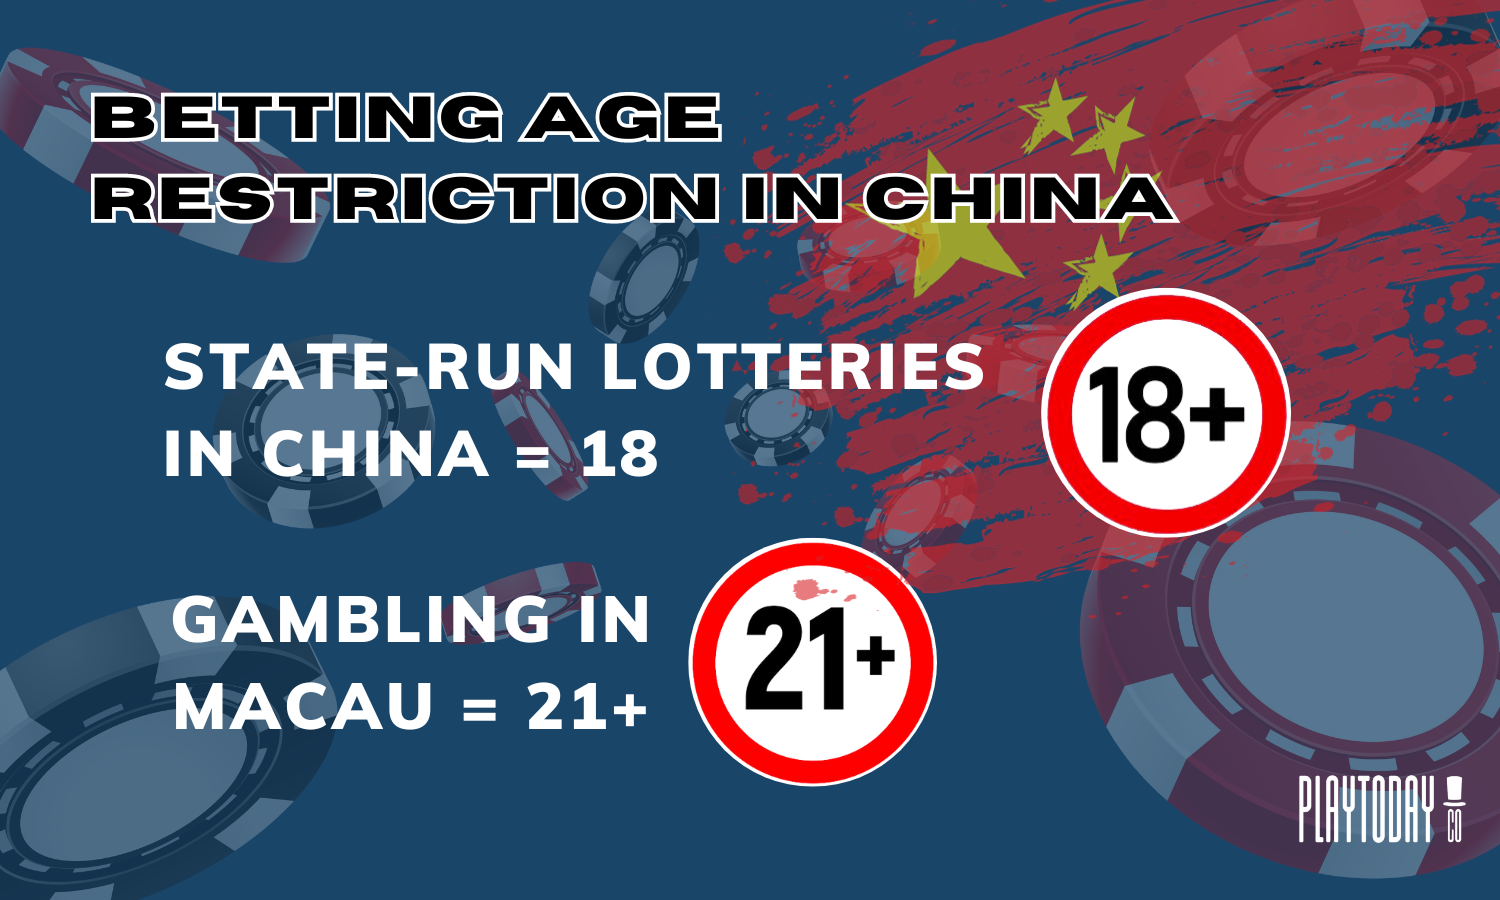 Betting age restrictions in China